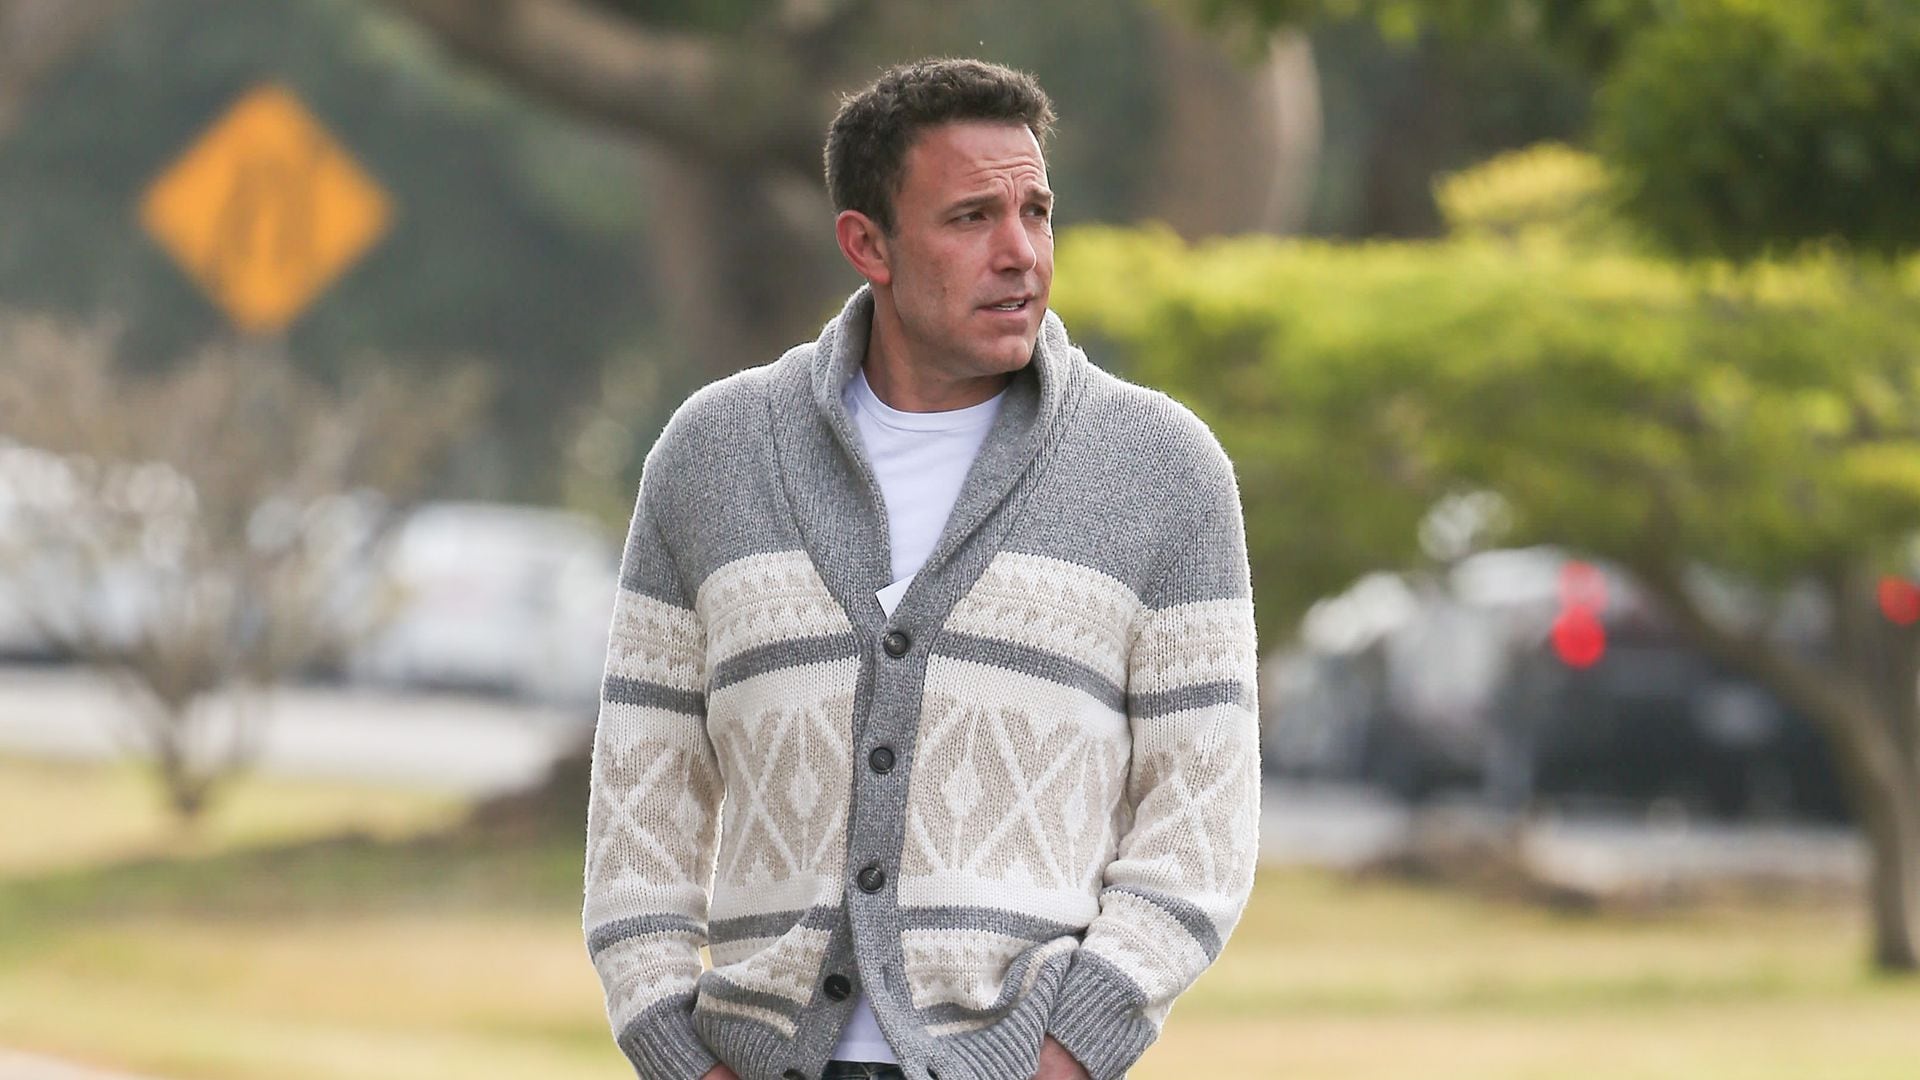 Ben Affleck was spotted without his wedding band while having lunch with his daughter